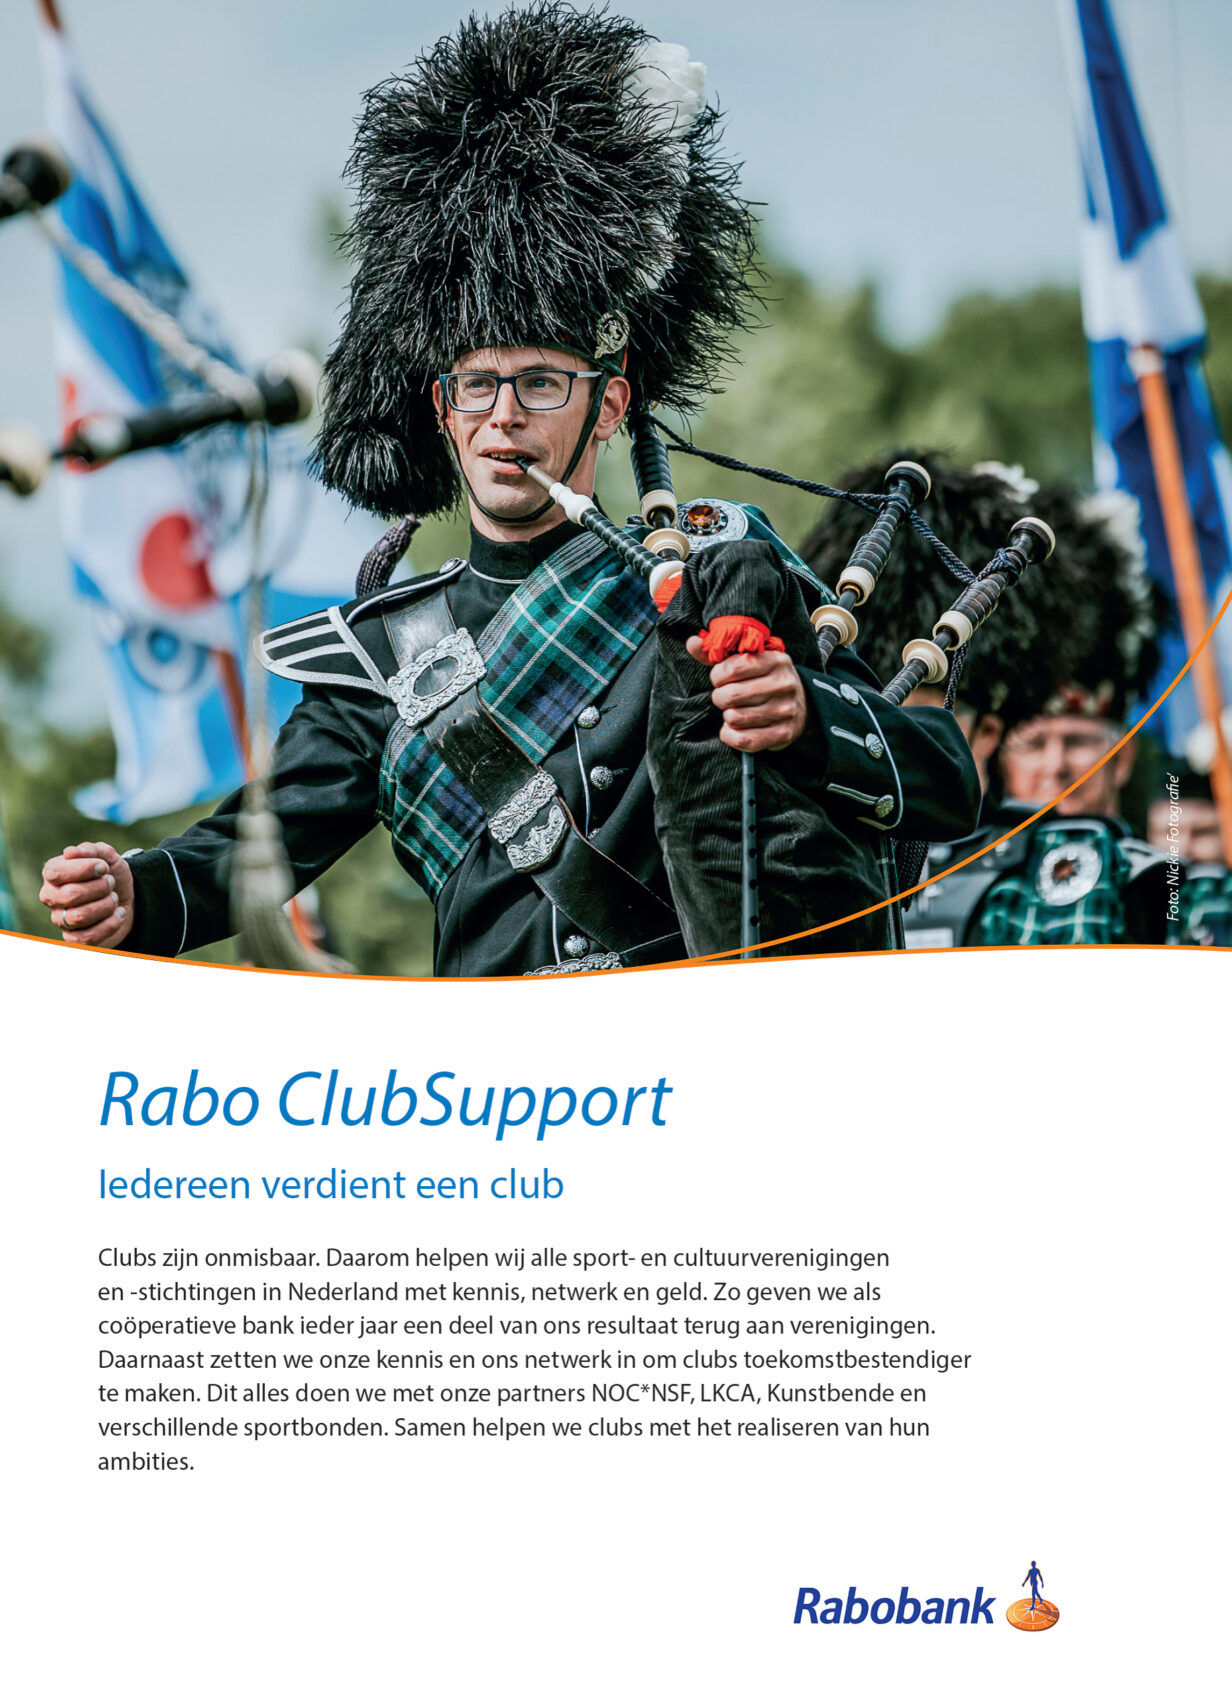 Rabo Clubsupport flyer met doedelzakband Graham Lowlanders Pipes and Drums.